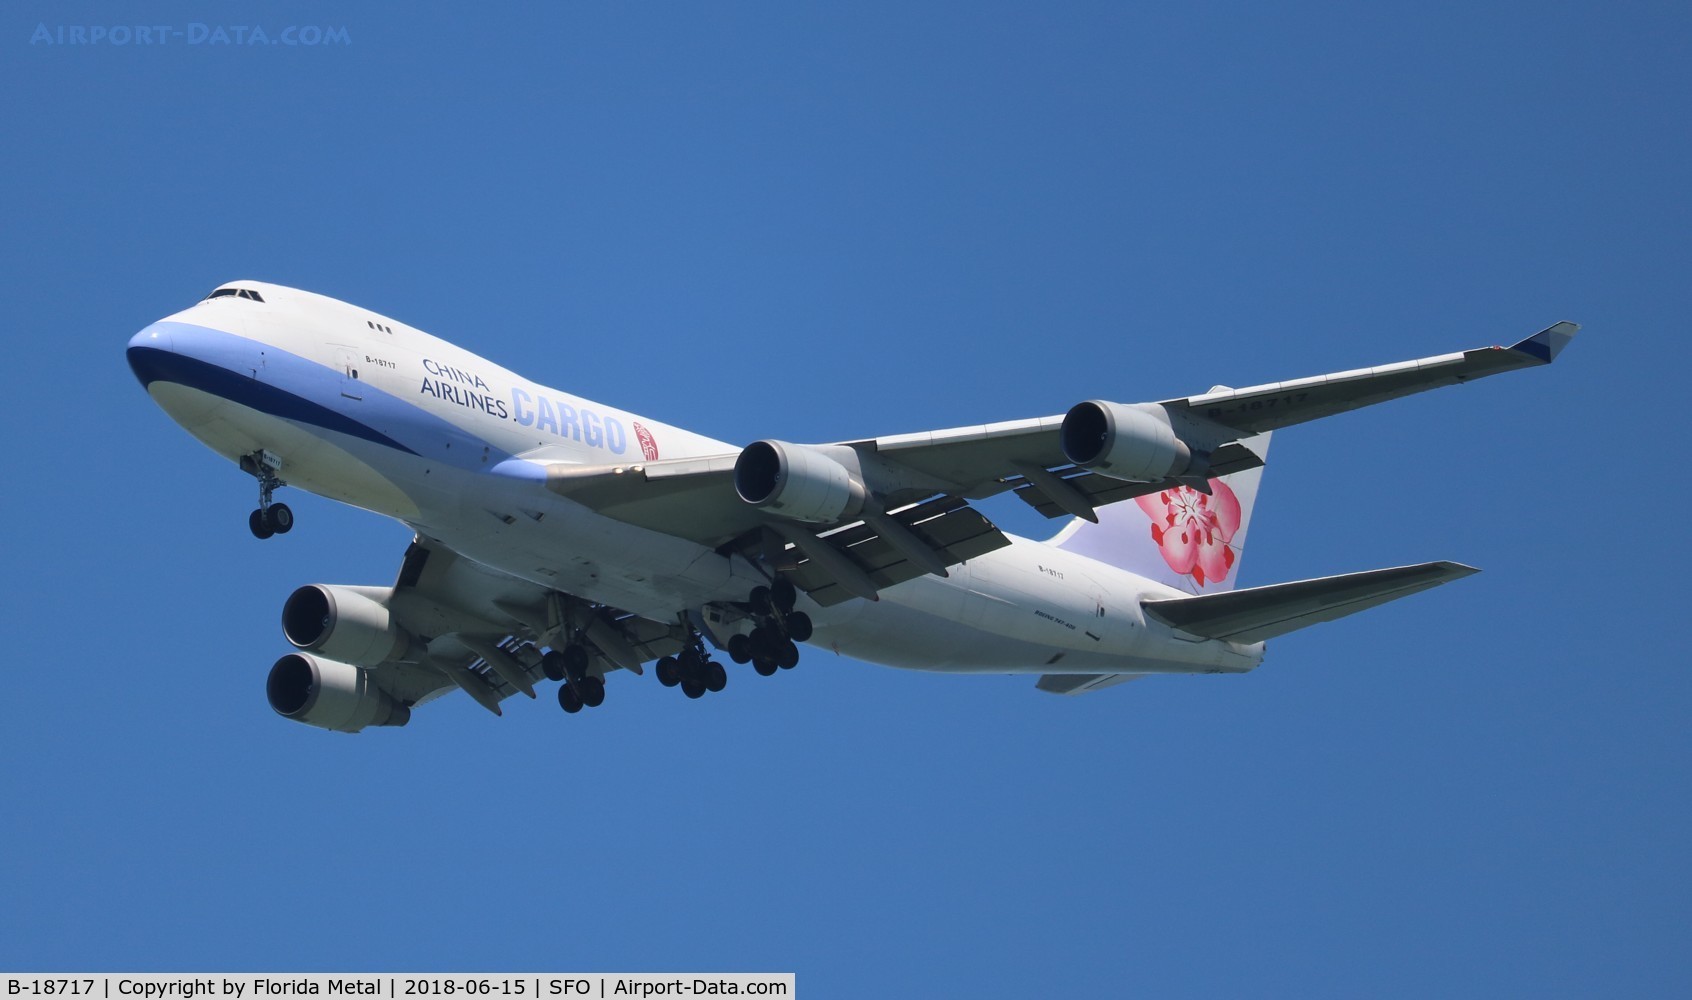 B-18717, 2004 Boeing 747-409F/SCD C/N 30769, China Airlines Cargo